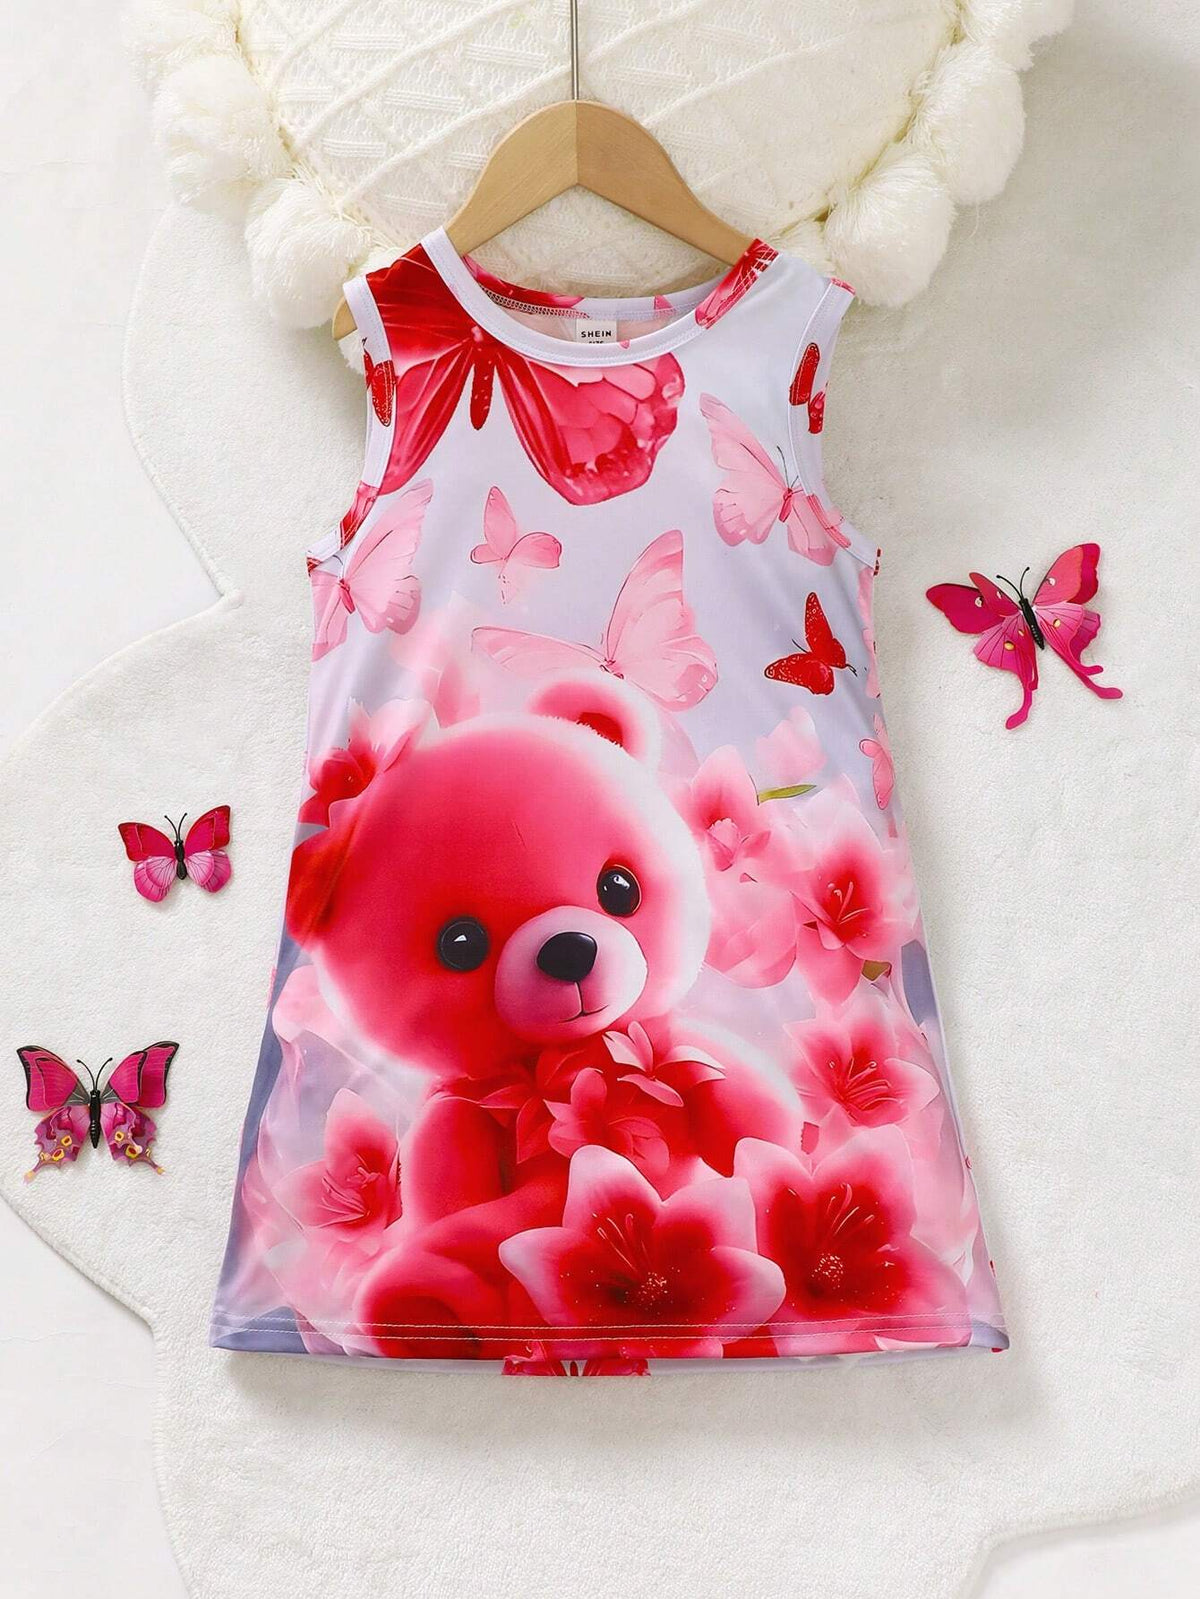 Young Girls' Casual Sleeveless Regular Dress With Cute Laser Digital Positioning Floral, Butterfly, And Bear Patterns, Suitable As Home Clothing